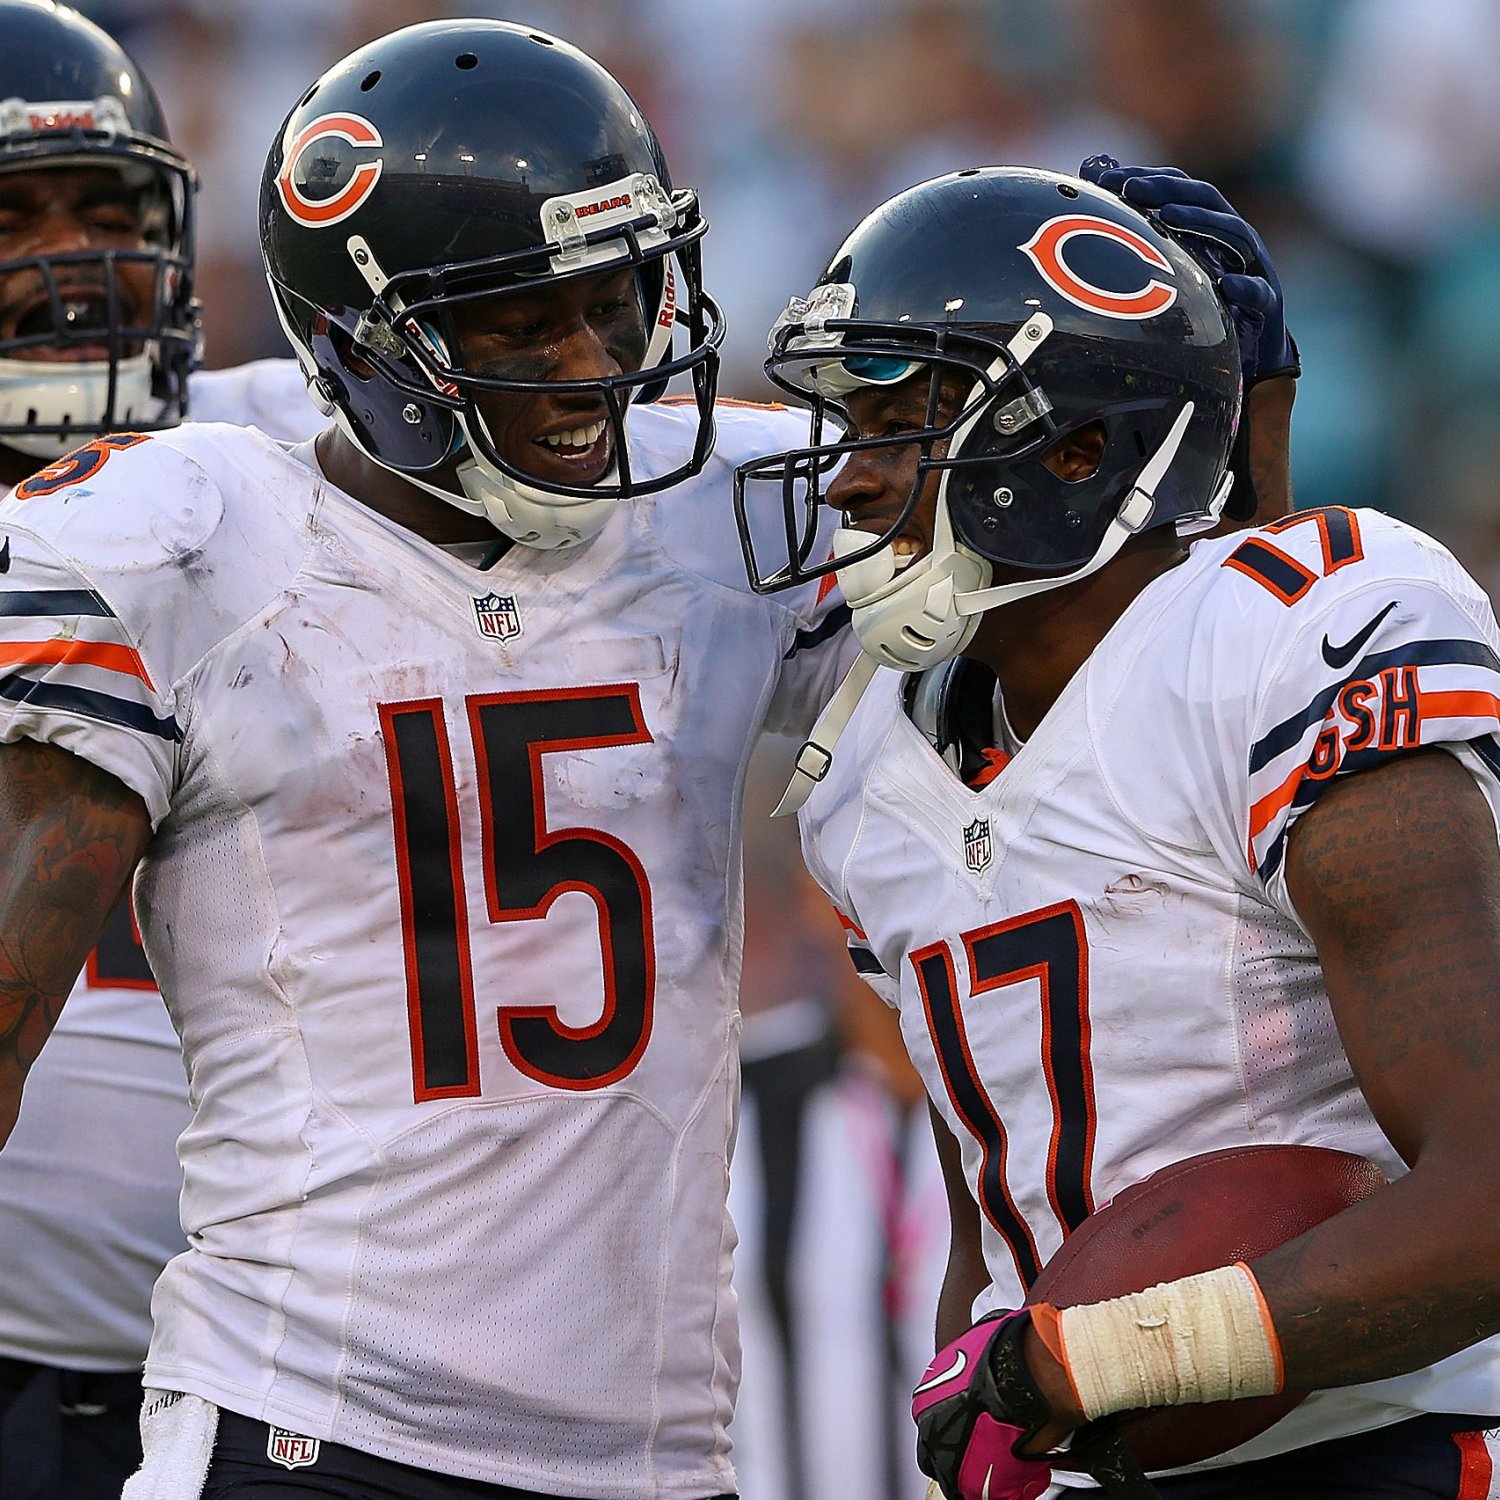 hi-res-153634698-alshon-jeffery-of-the-chicago-bears-is-congratulated-by_crop_exact.jpg